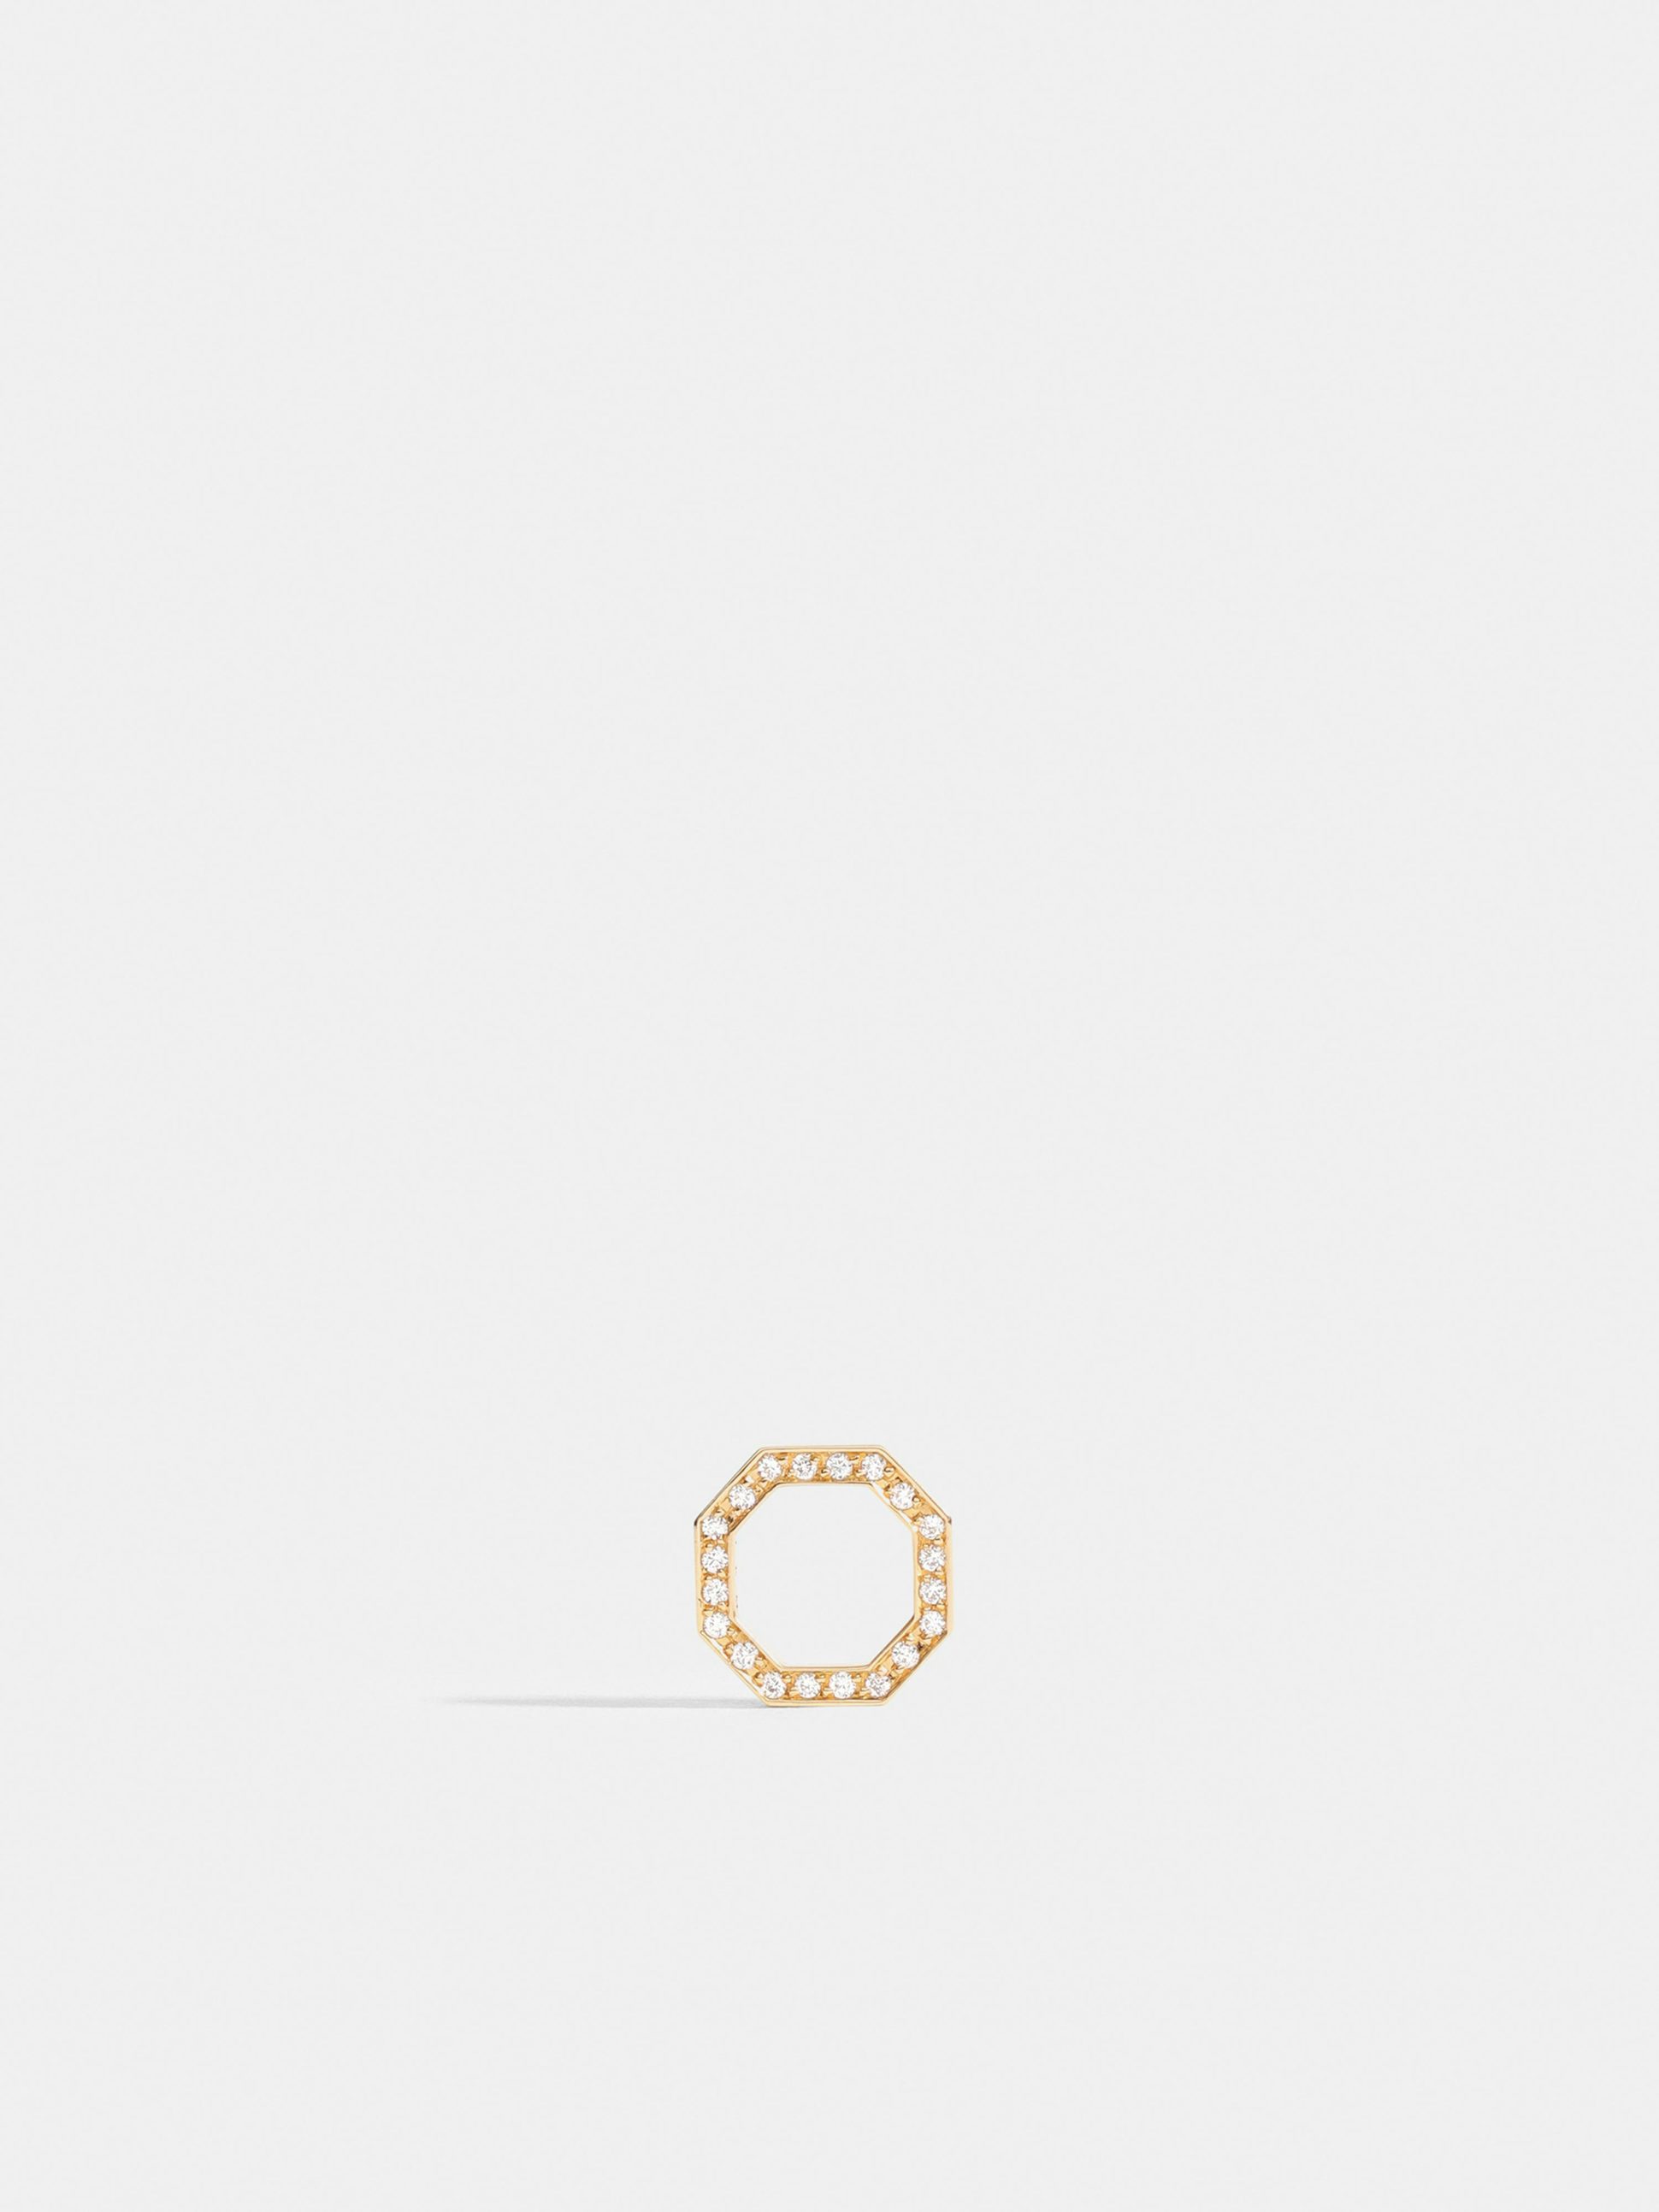 Octogone motif in 18k Fairmined ethical yellow gold, paved with lab-grown diamonds, on a bright orange cord.